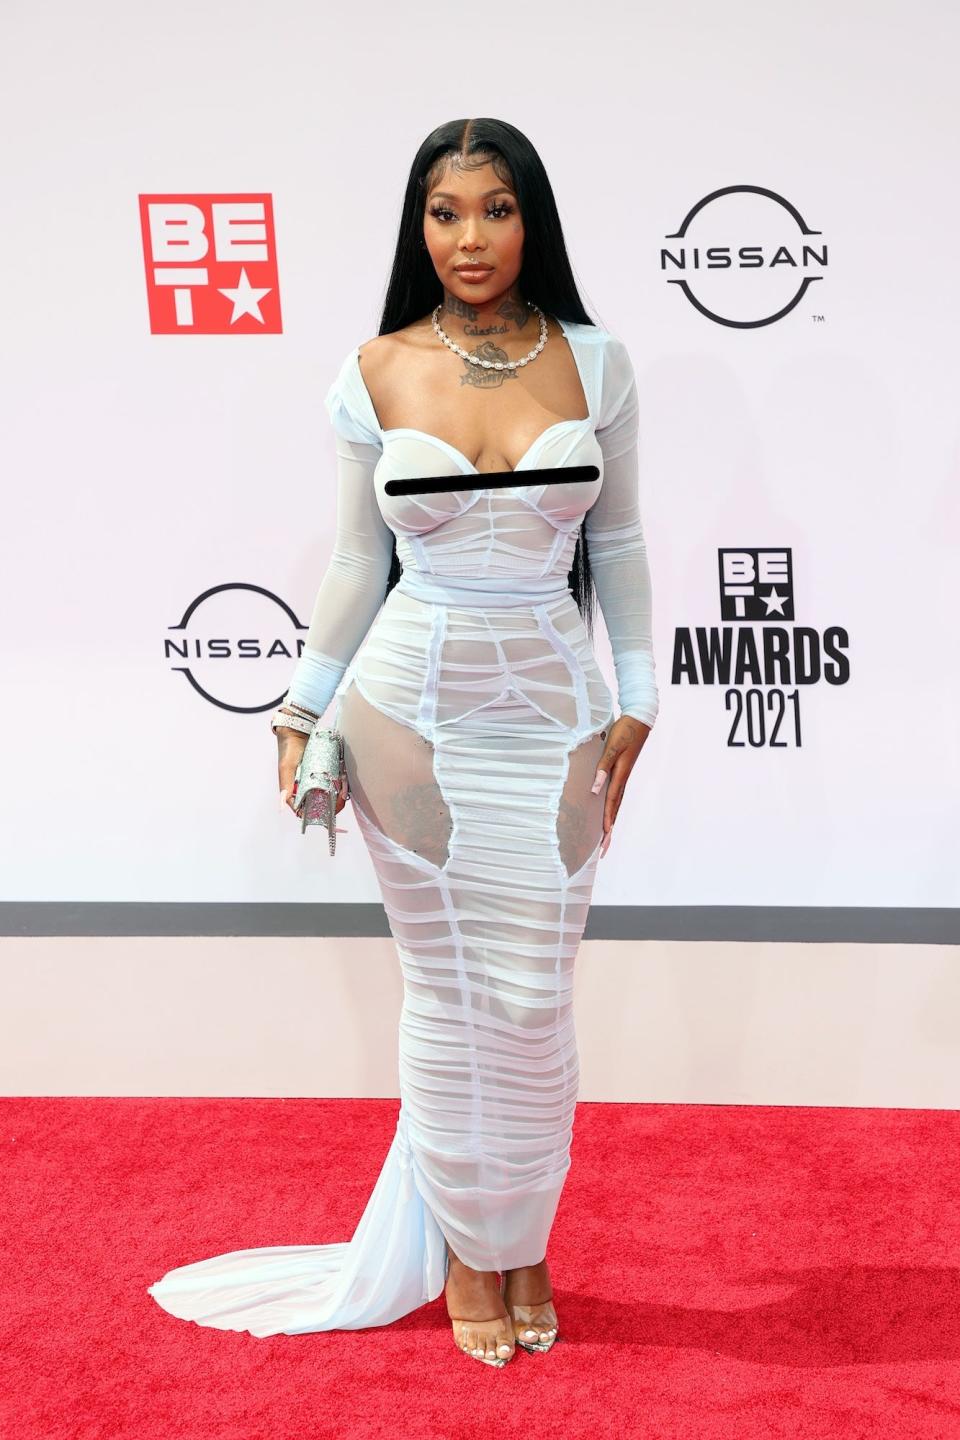 Summer Walker wears a baby-blue mesh gown at the 2021 BET Awards.